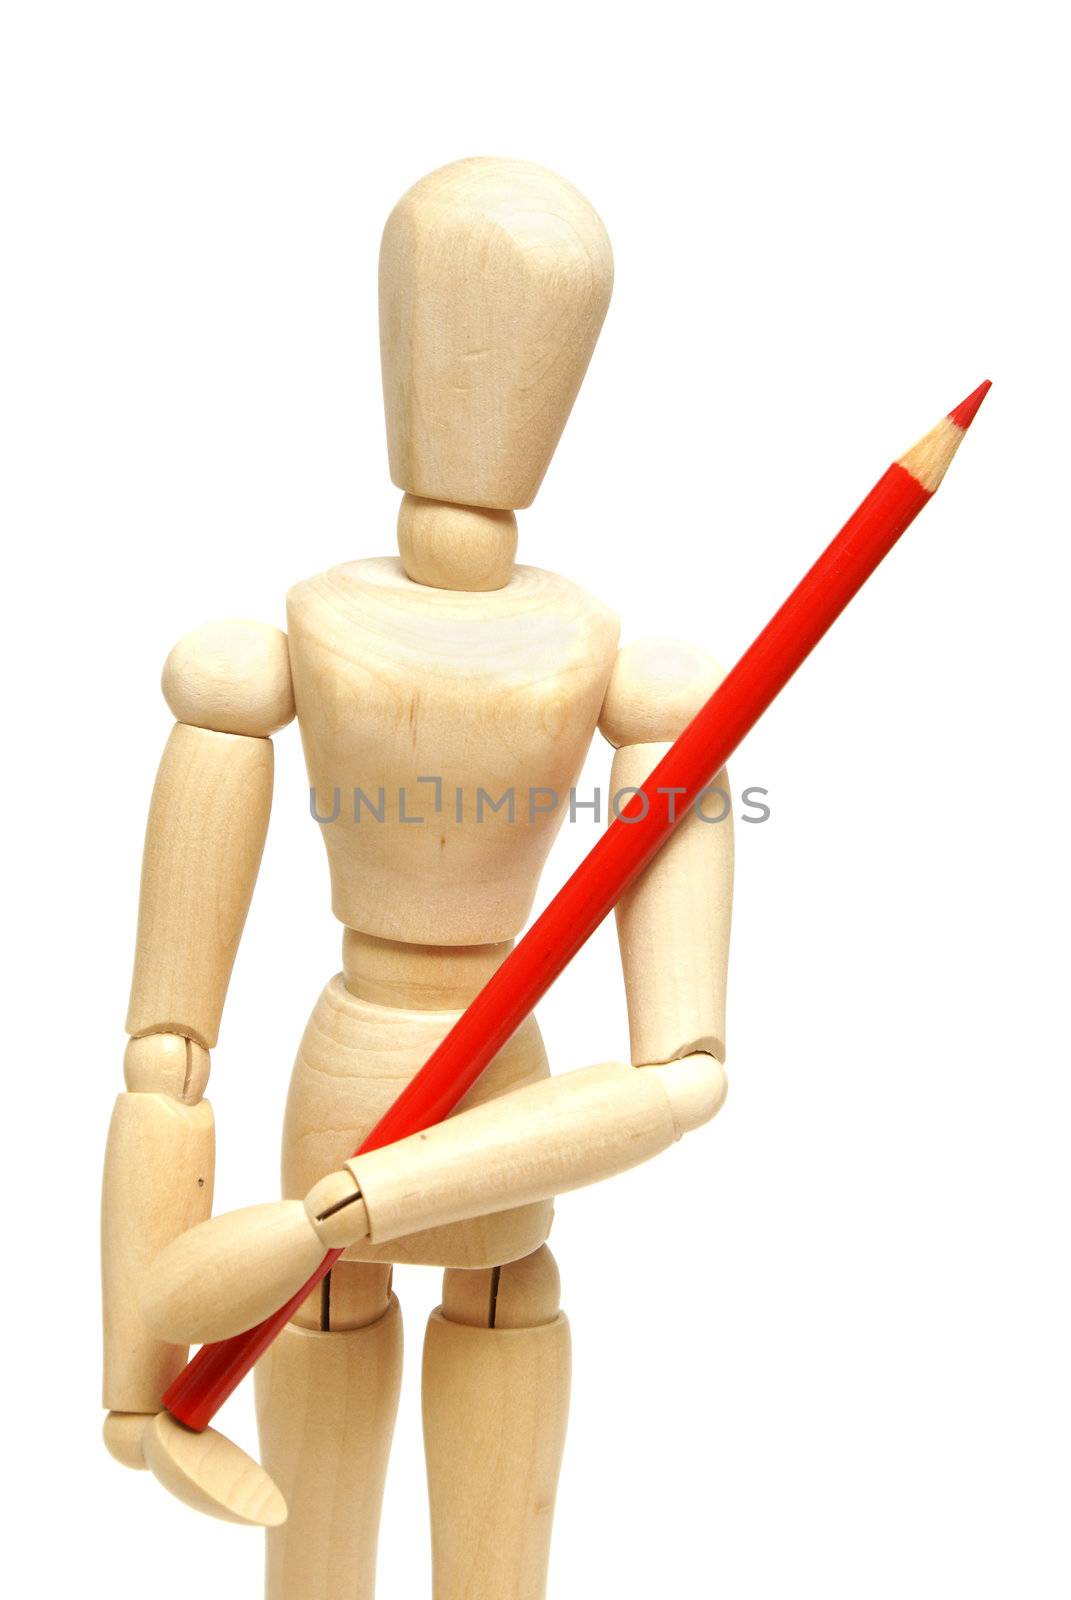 A wood mannequin holds a red pencil crayon for the artist.